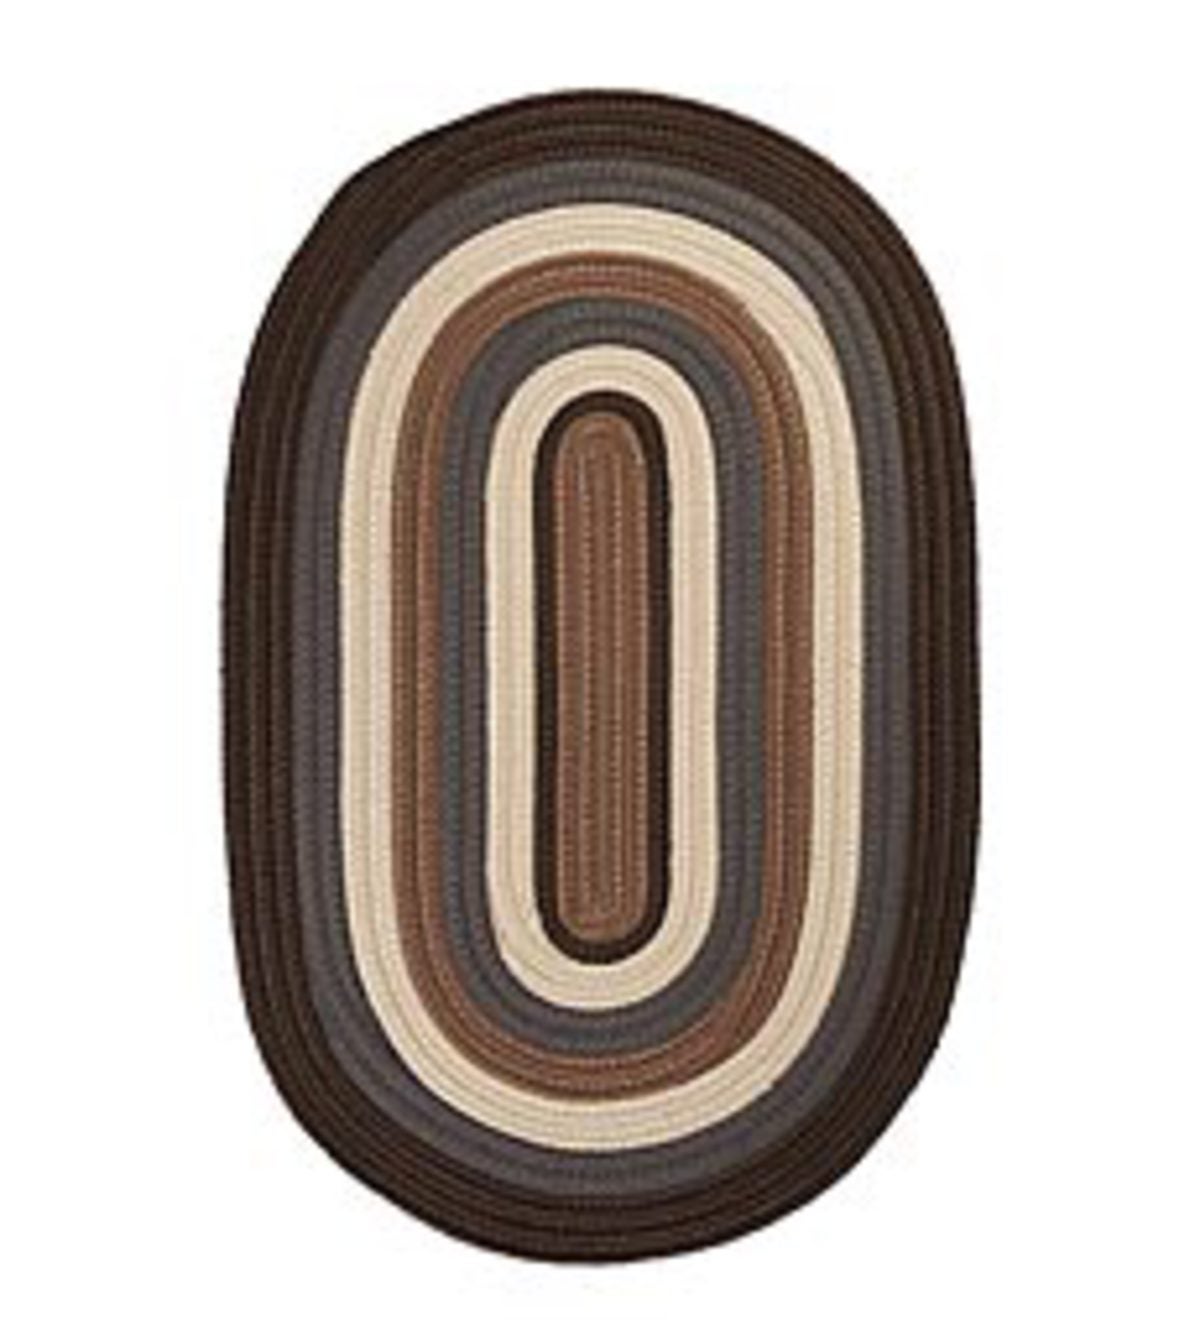 2' x 8' Banded Braided Indoor/Outdoor Rug - Brown